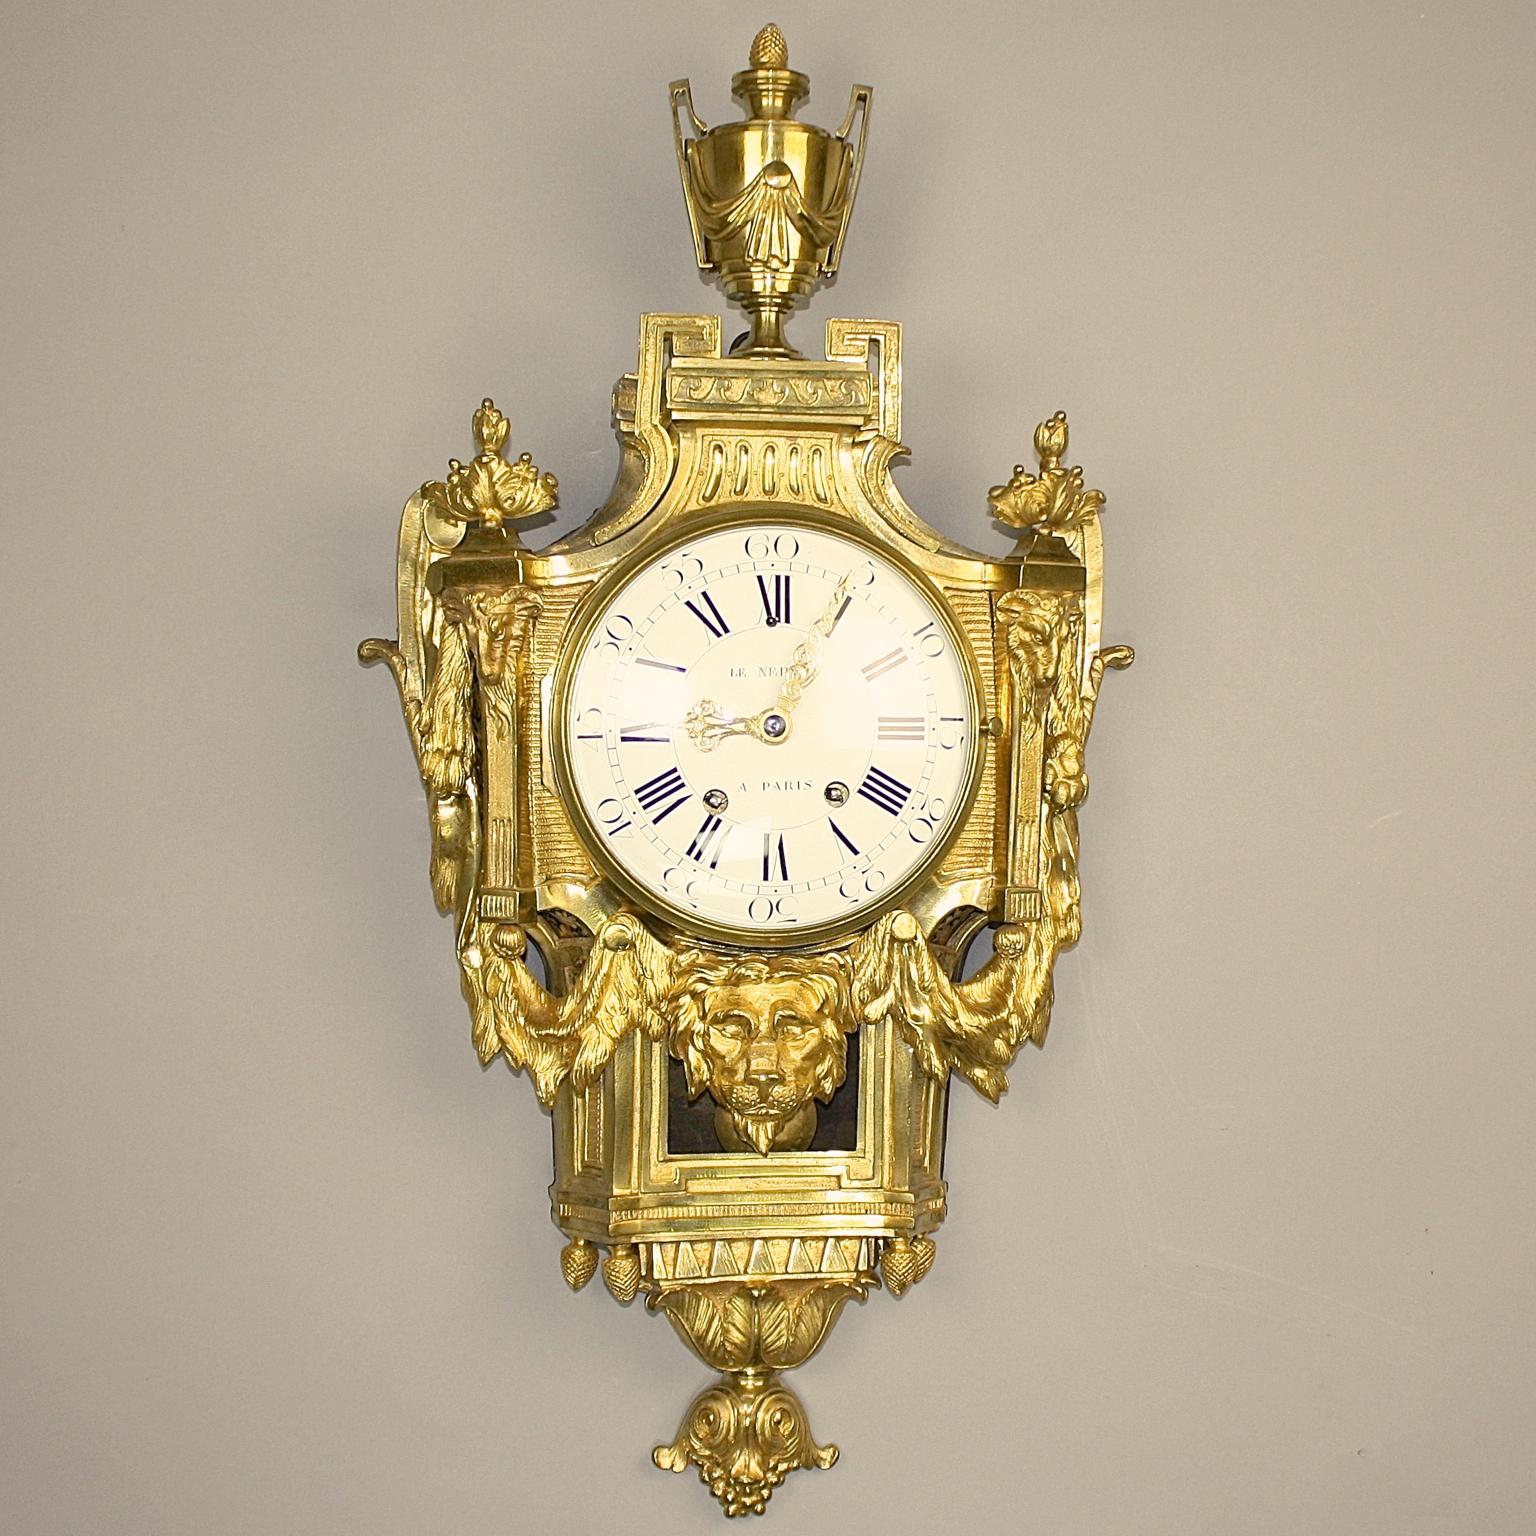 Large 18th Century French Bronze Louis XVI Lion Mask Wall Clock Signed Le Nepveu

An 18th century gilt bronze Cartel clock with a white enamel dial signed Le Nepveu a Paris, with finely pierced and engraved gilt hands, the Roman and Arabic numerals